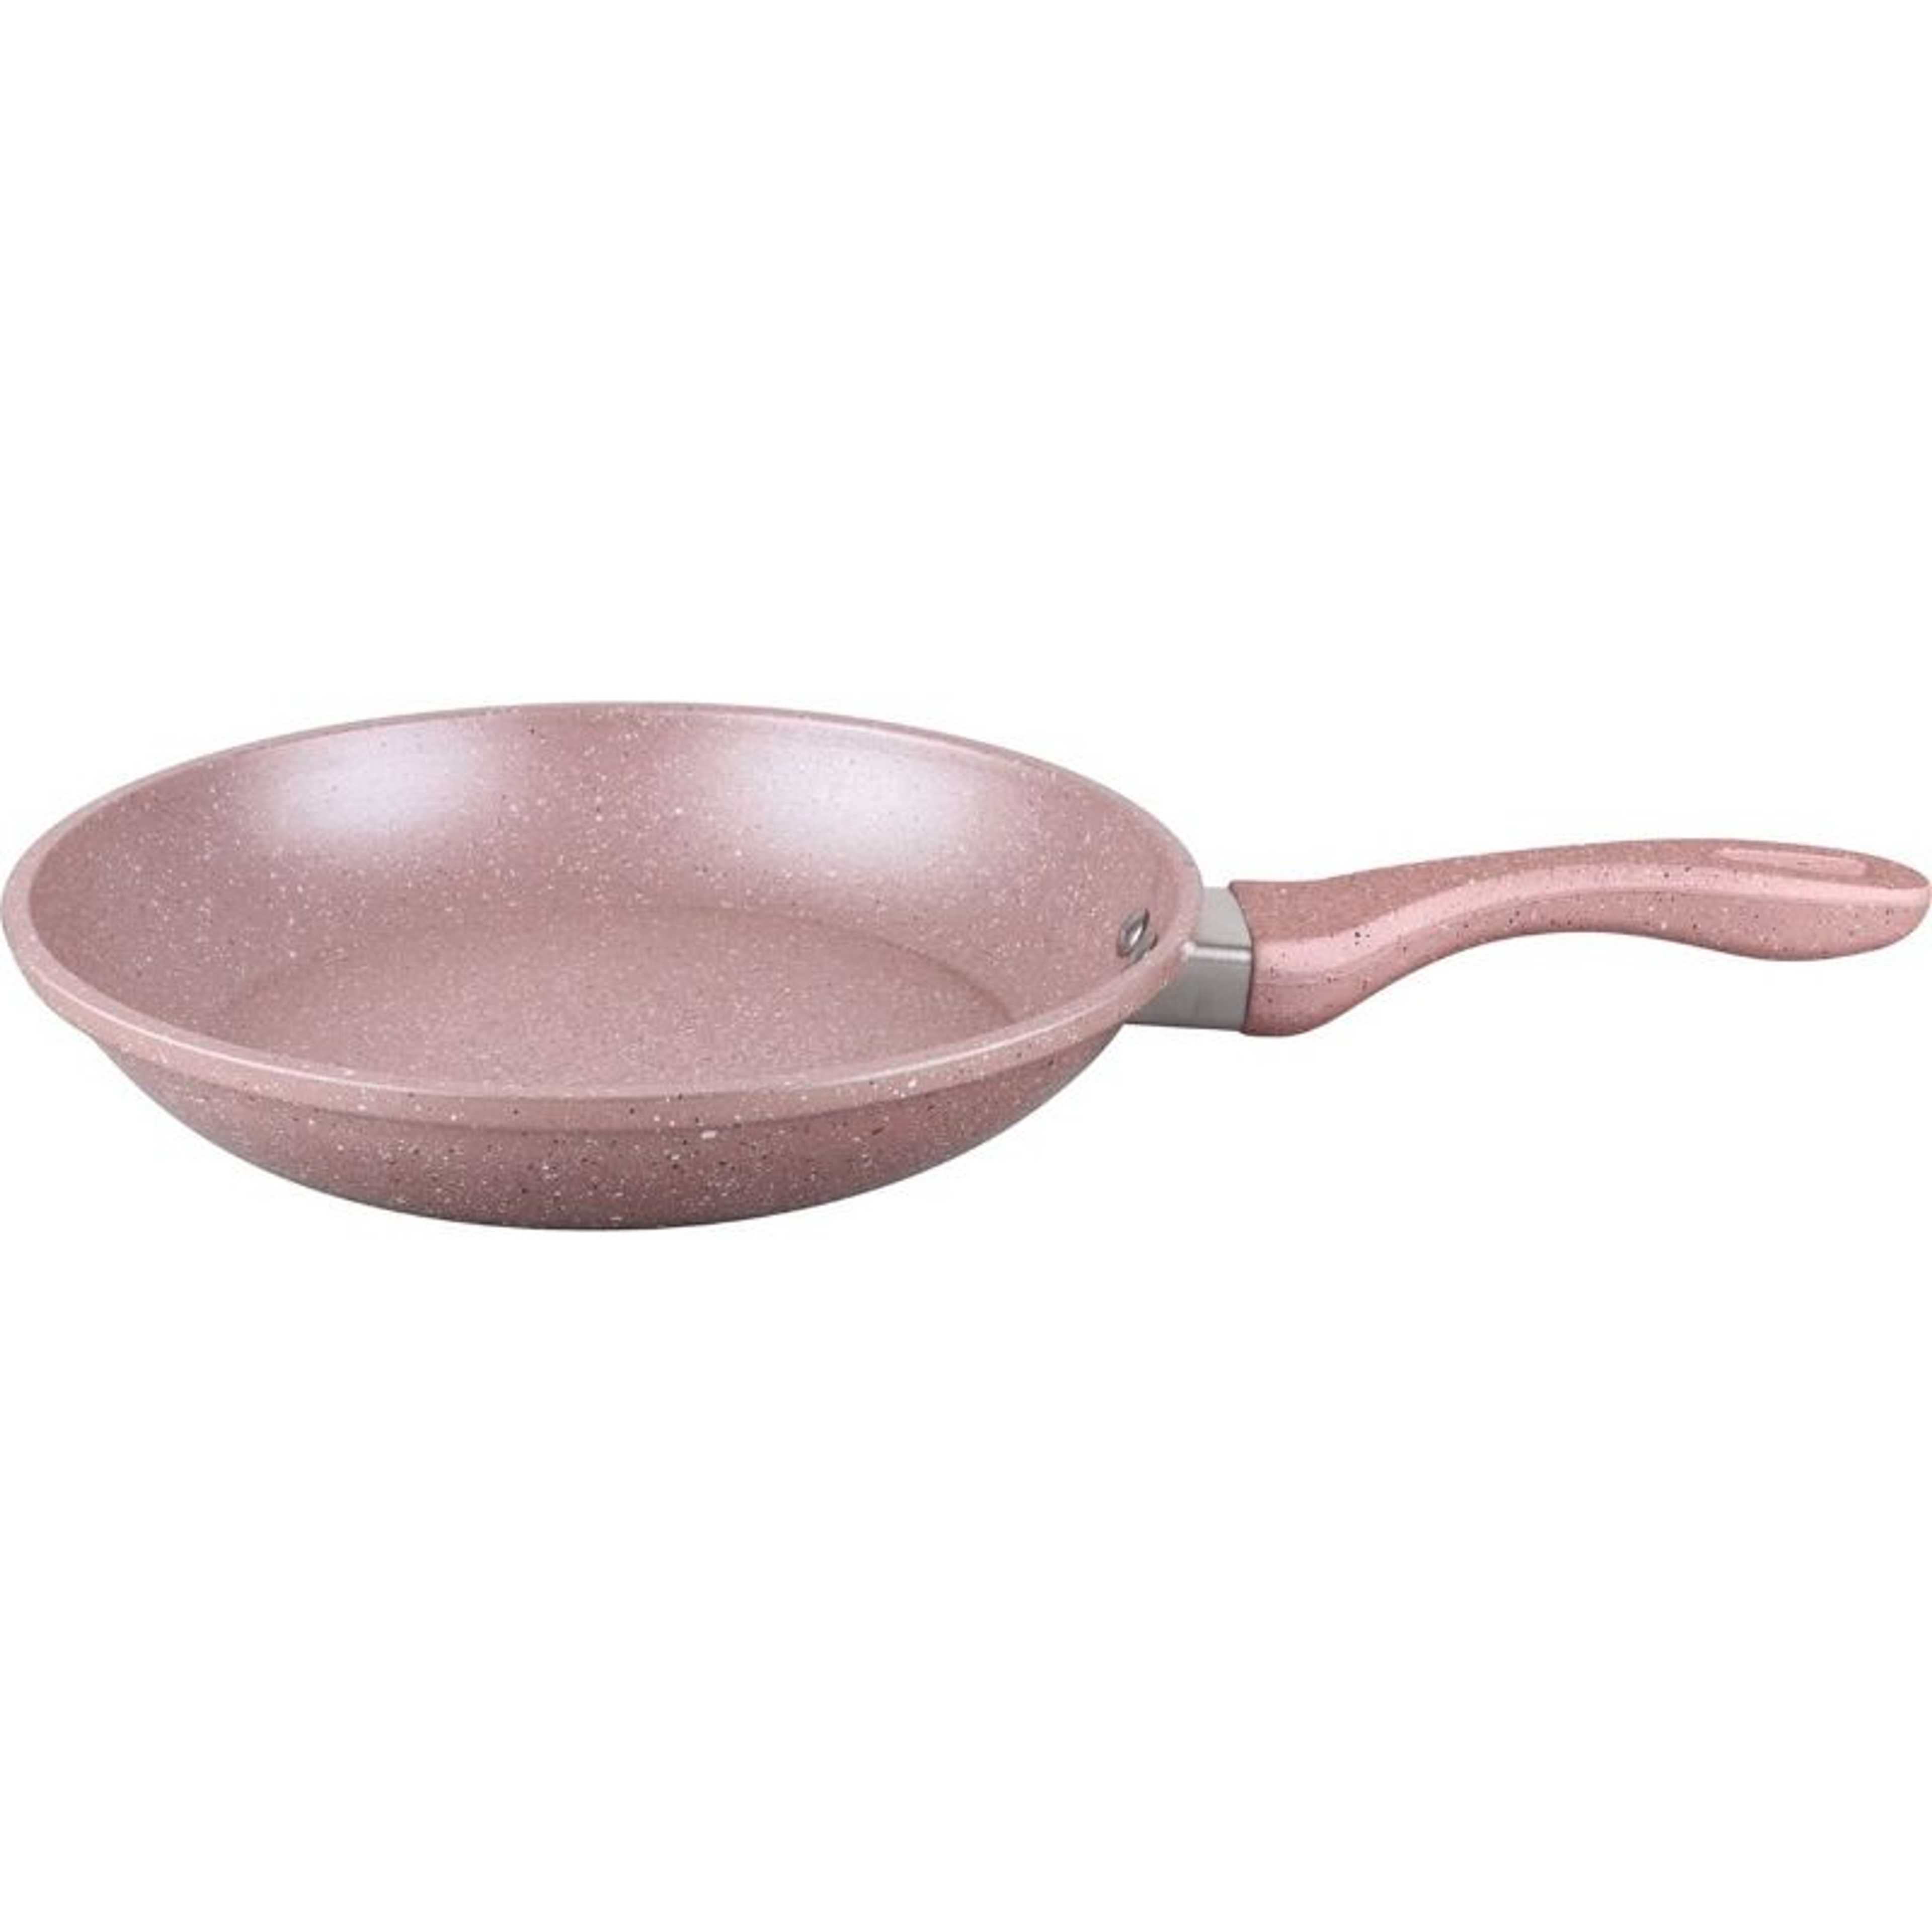 Dessini Granite Coating Fry Pan 26 Cm For Kitchen Best Quality In Use